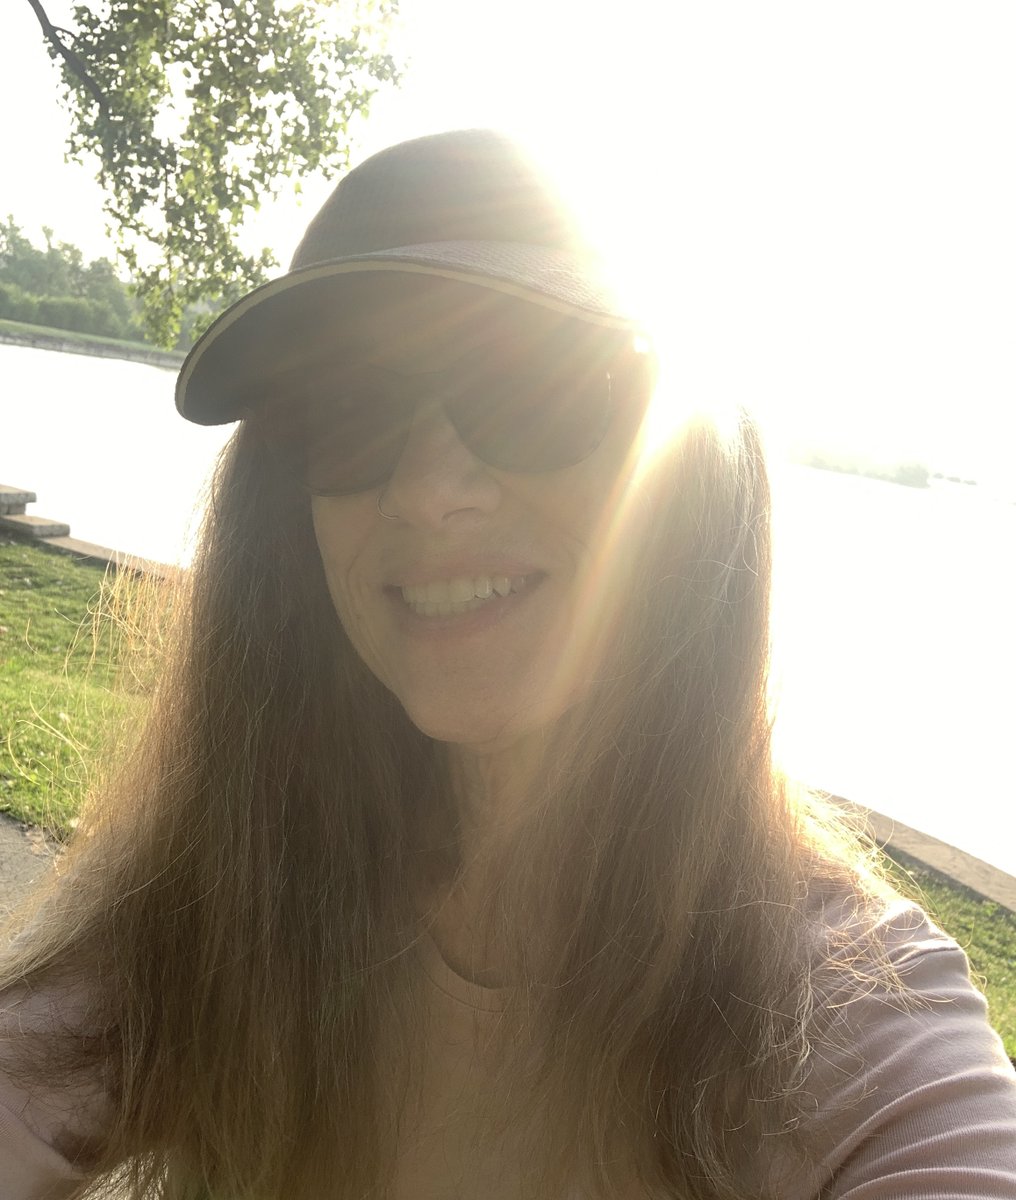 Time for a #ThrowbackThursday photo! Taken maybe a year ago on one of my morning walks. 'Sunshine on my shoulders makes me happy Sunshine in my eyes can make me cry Sunshine on the water looks so lovely Sunshine almost always makes me high.' 🎶 #song #lyrics #quote #JohnDenver